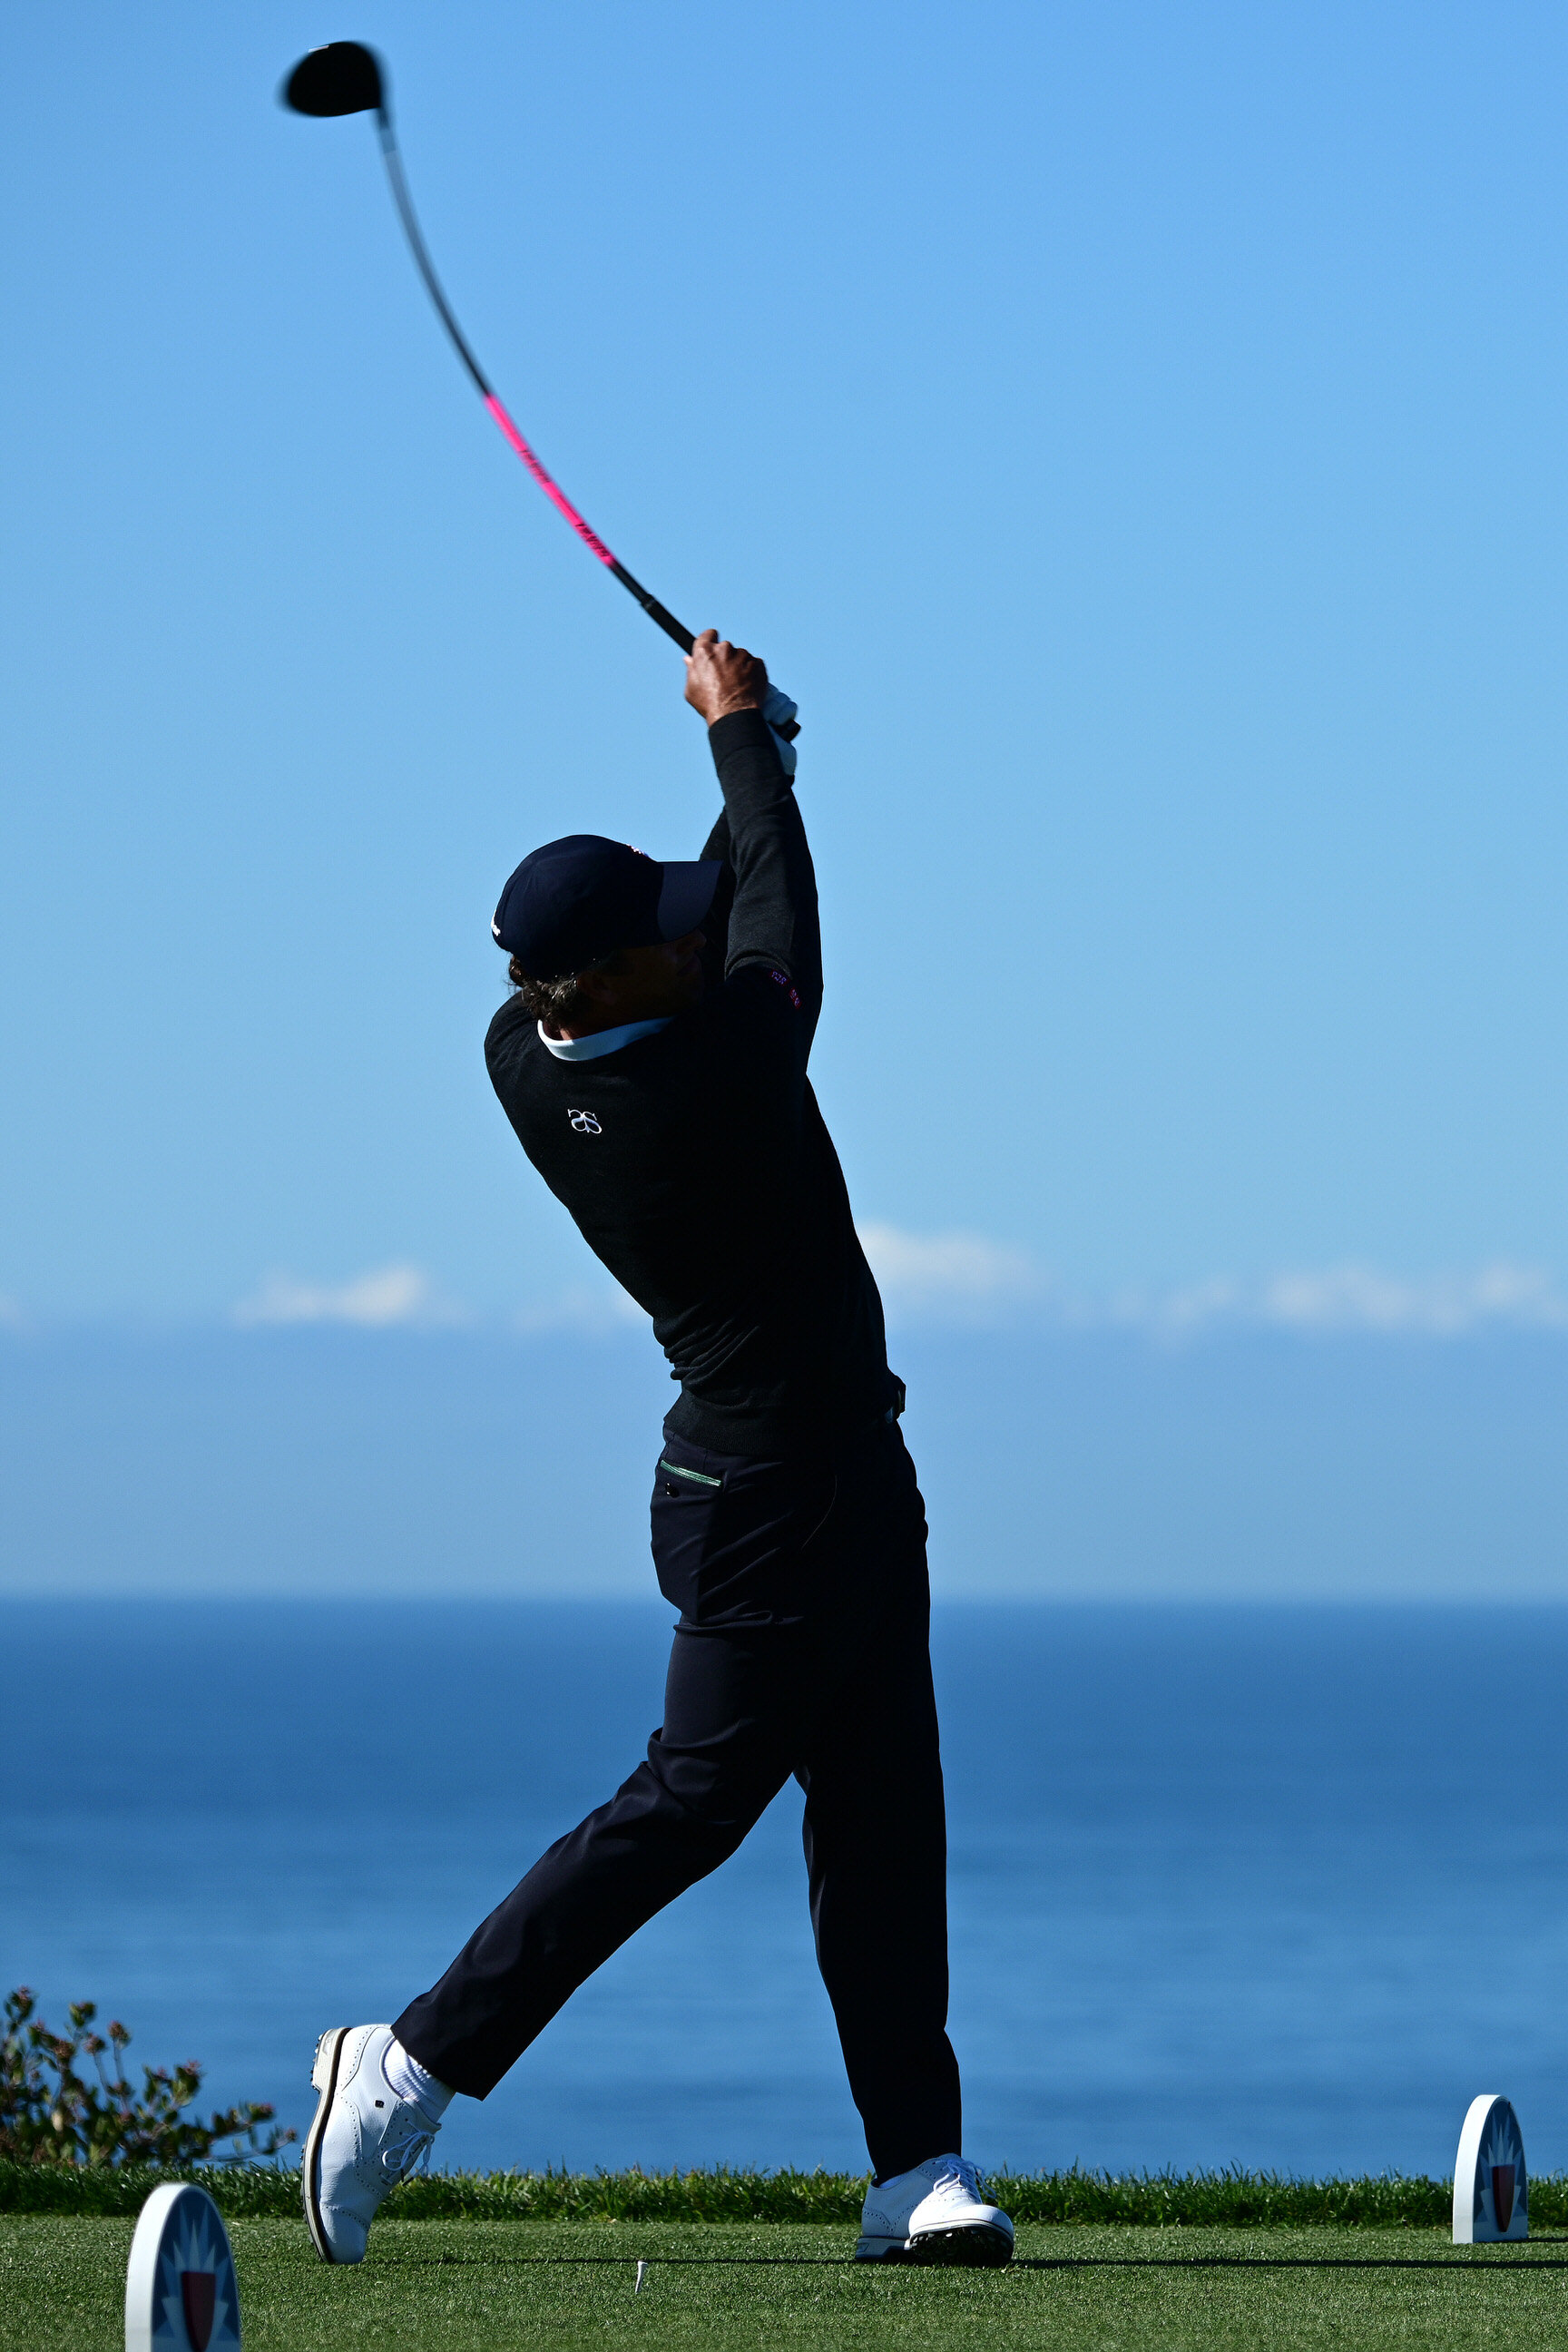  SAN DIEGO, CALIFORNIA - JANUARY 30: Adam Scott hits his tee shot on the 4th hole during round three of the Farmers Insurance Open at Torrey Pines South on January 30, 2021 in San Diego, California. (Photo by Donald Miralle/Getty Images) 